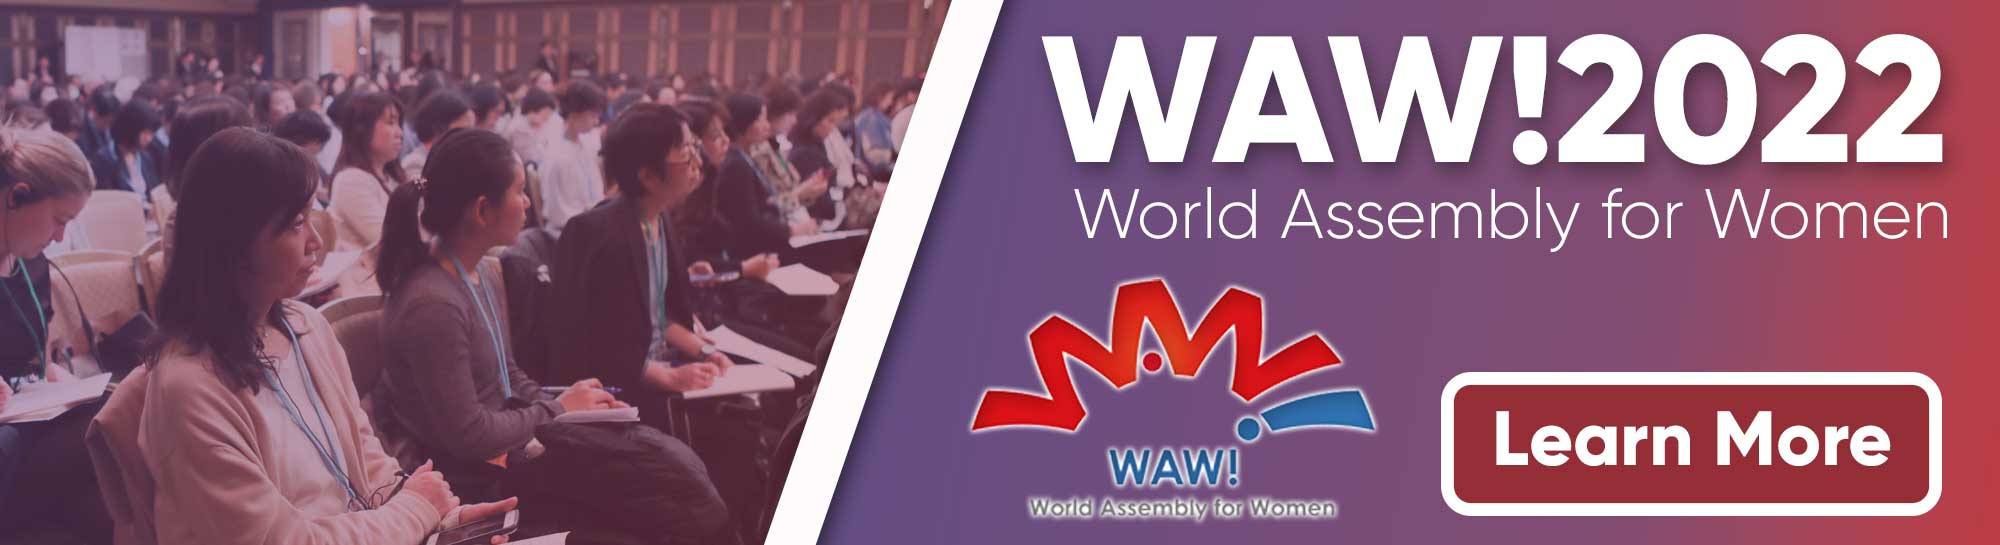 WAW!2022: Japan holds World Assembly for Women after three-year hiatus